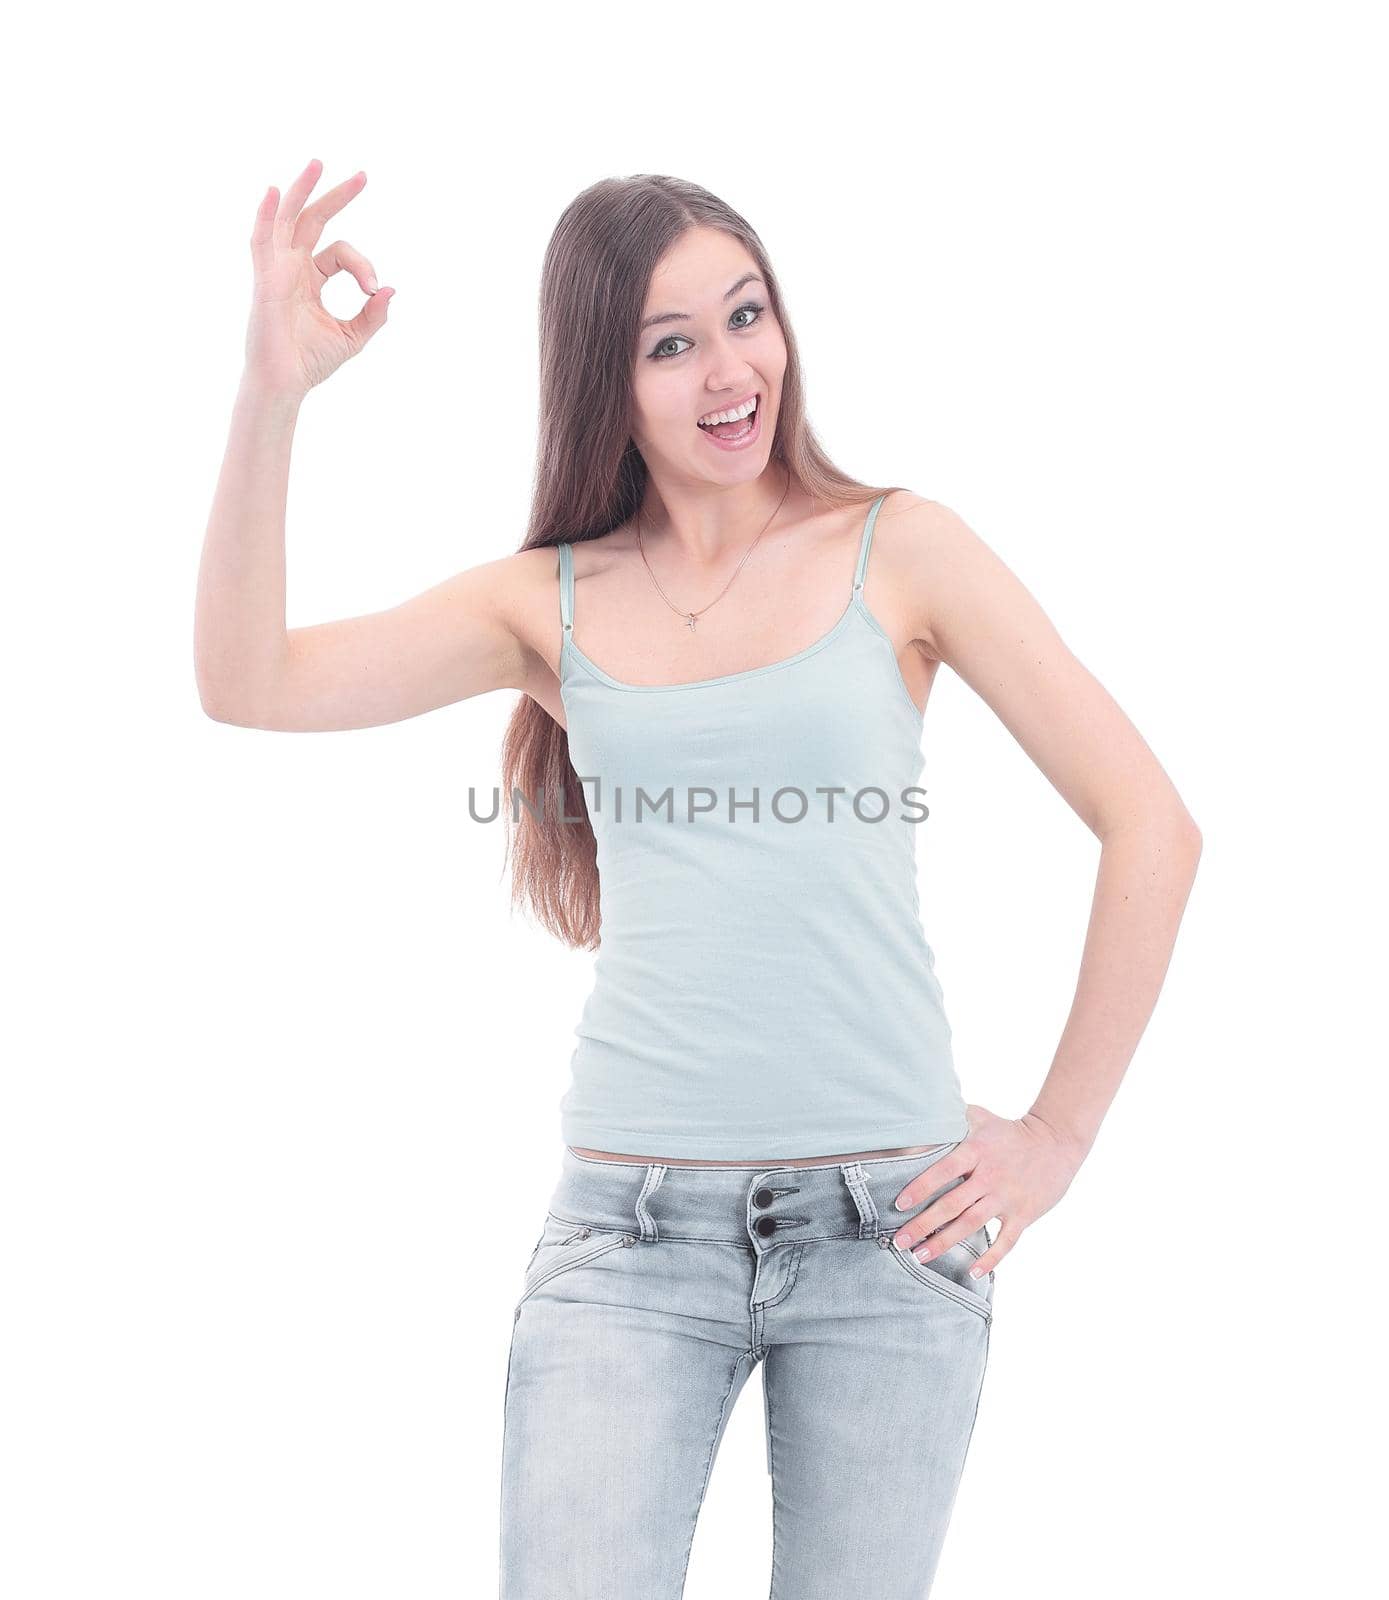 modern young woman showing the OK sign . isolated on a white background.photo with copy space